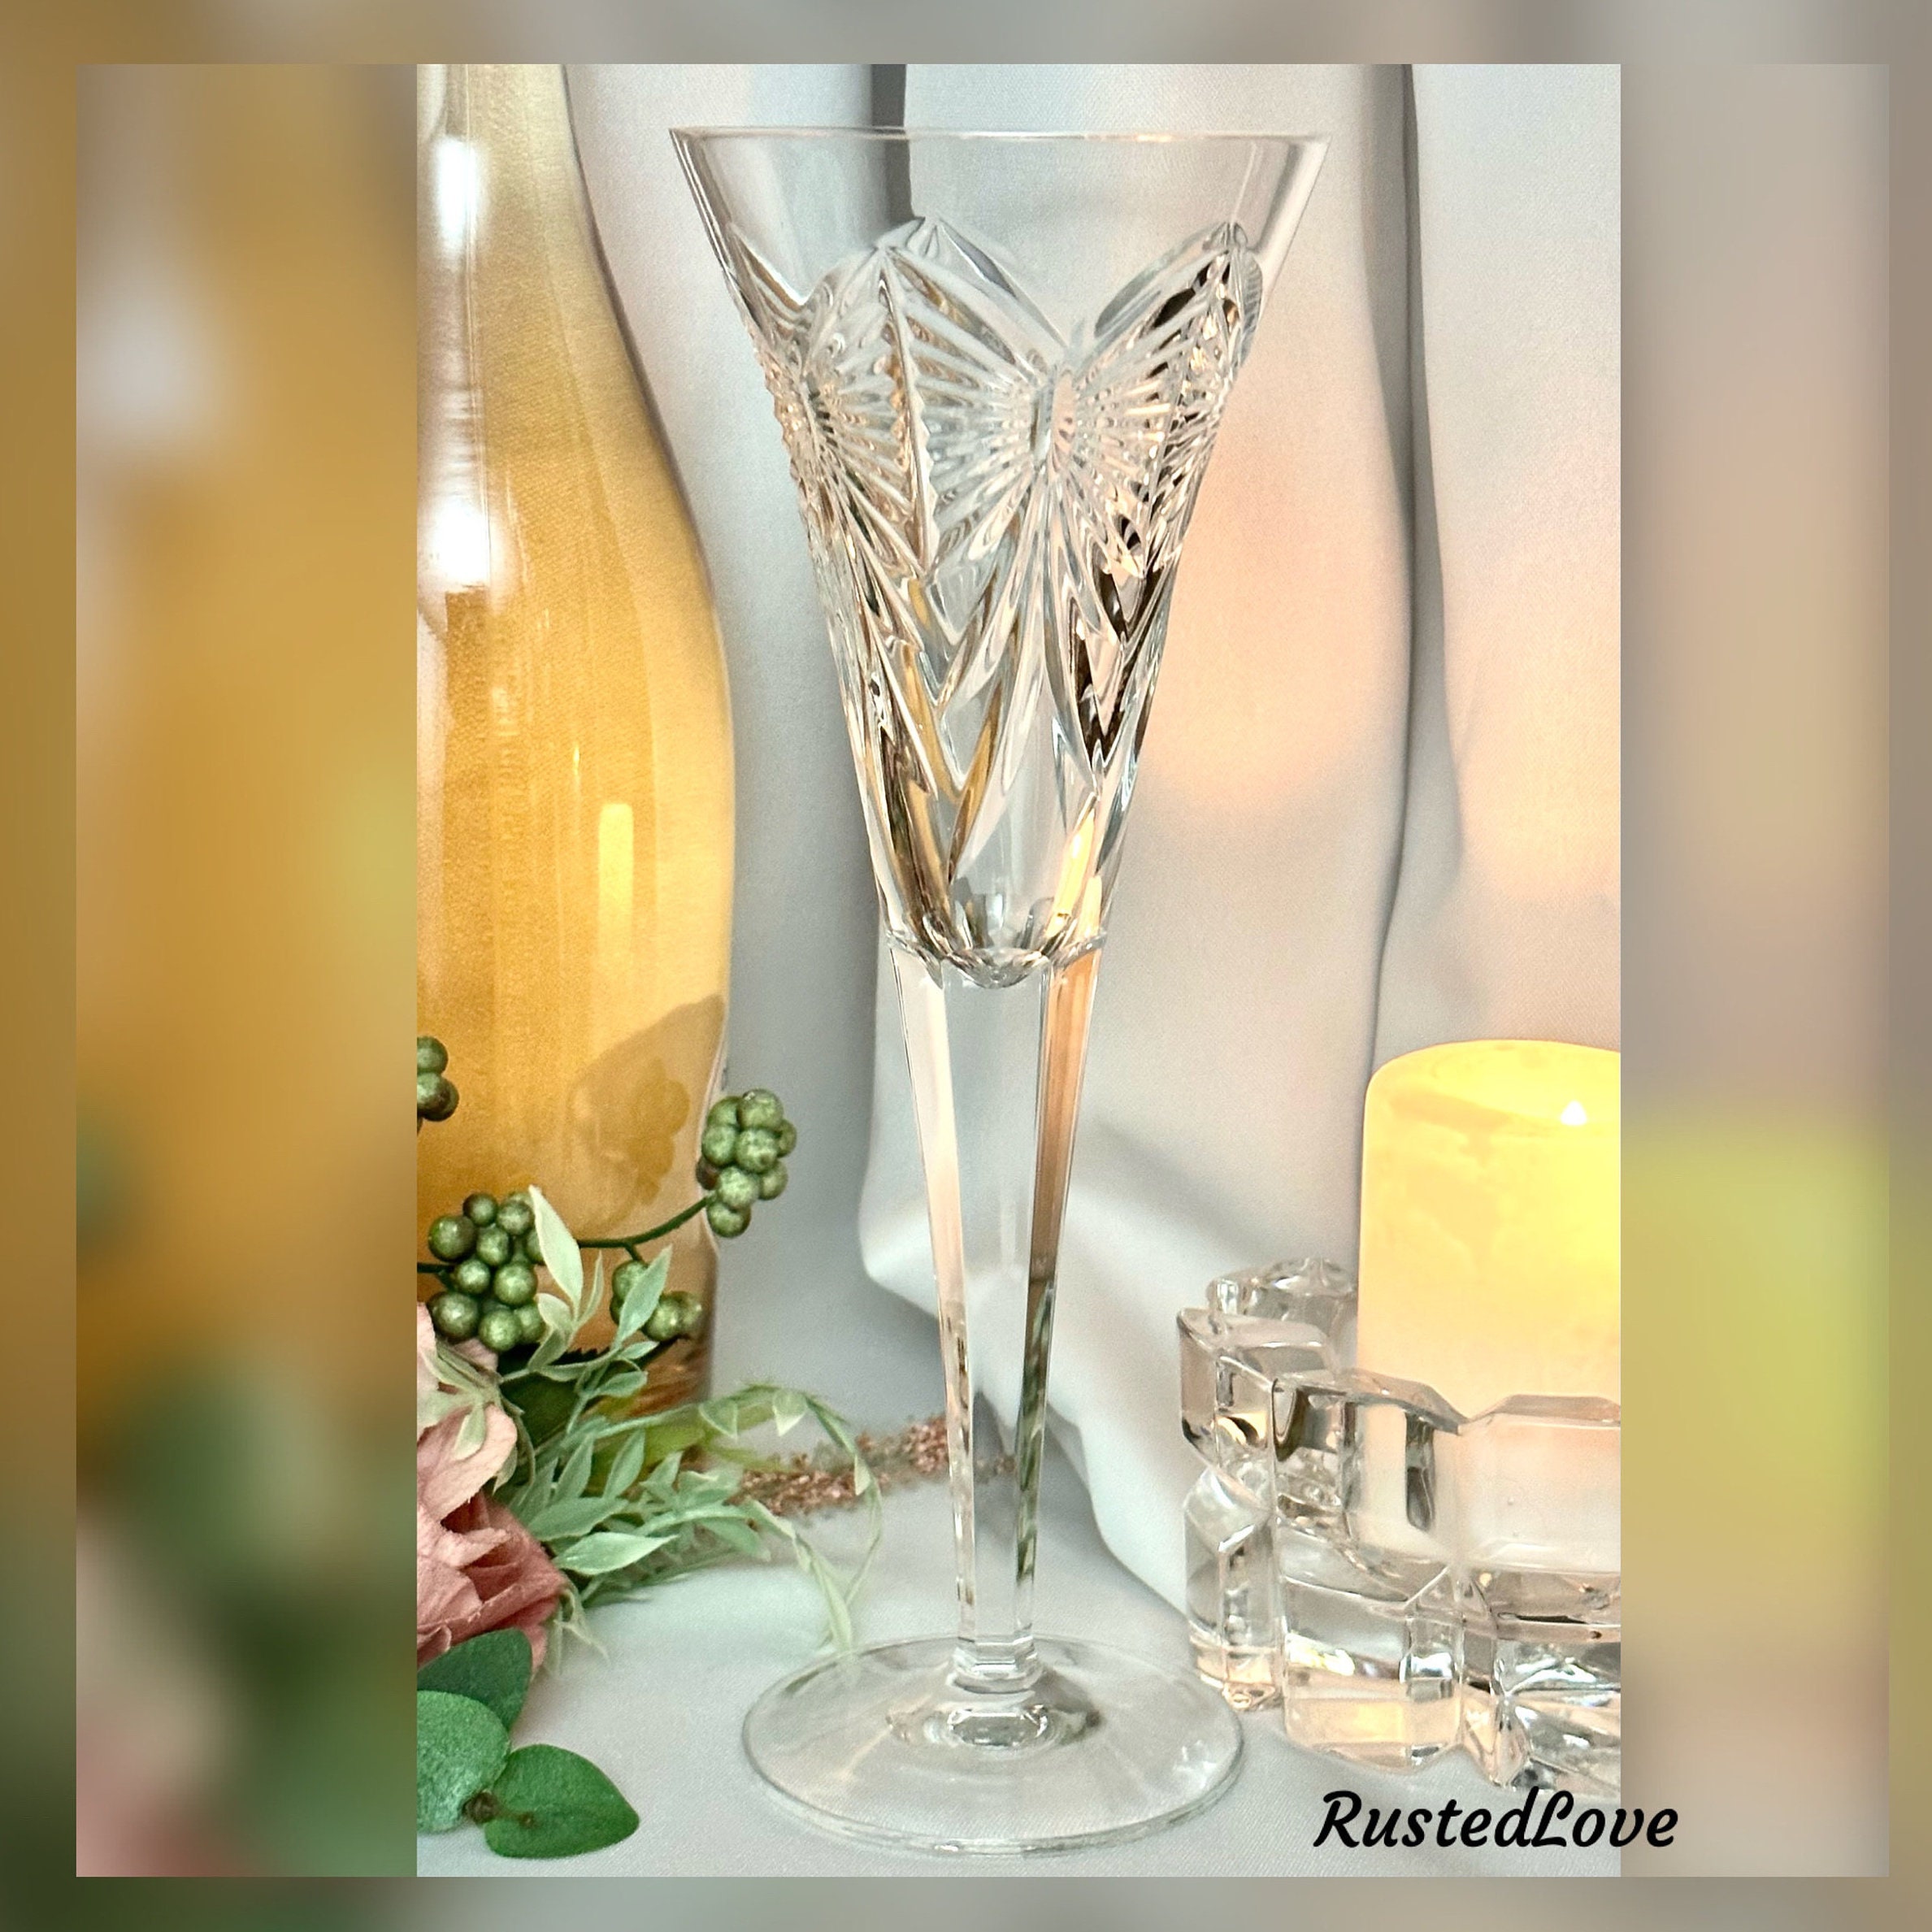 Waterford Crystal Toasting Flutes Collection